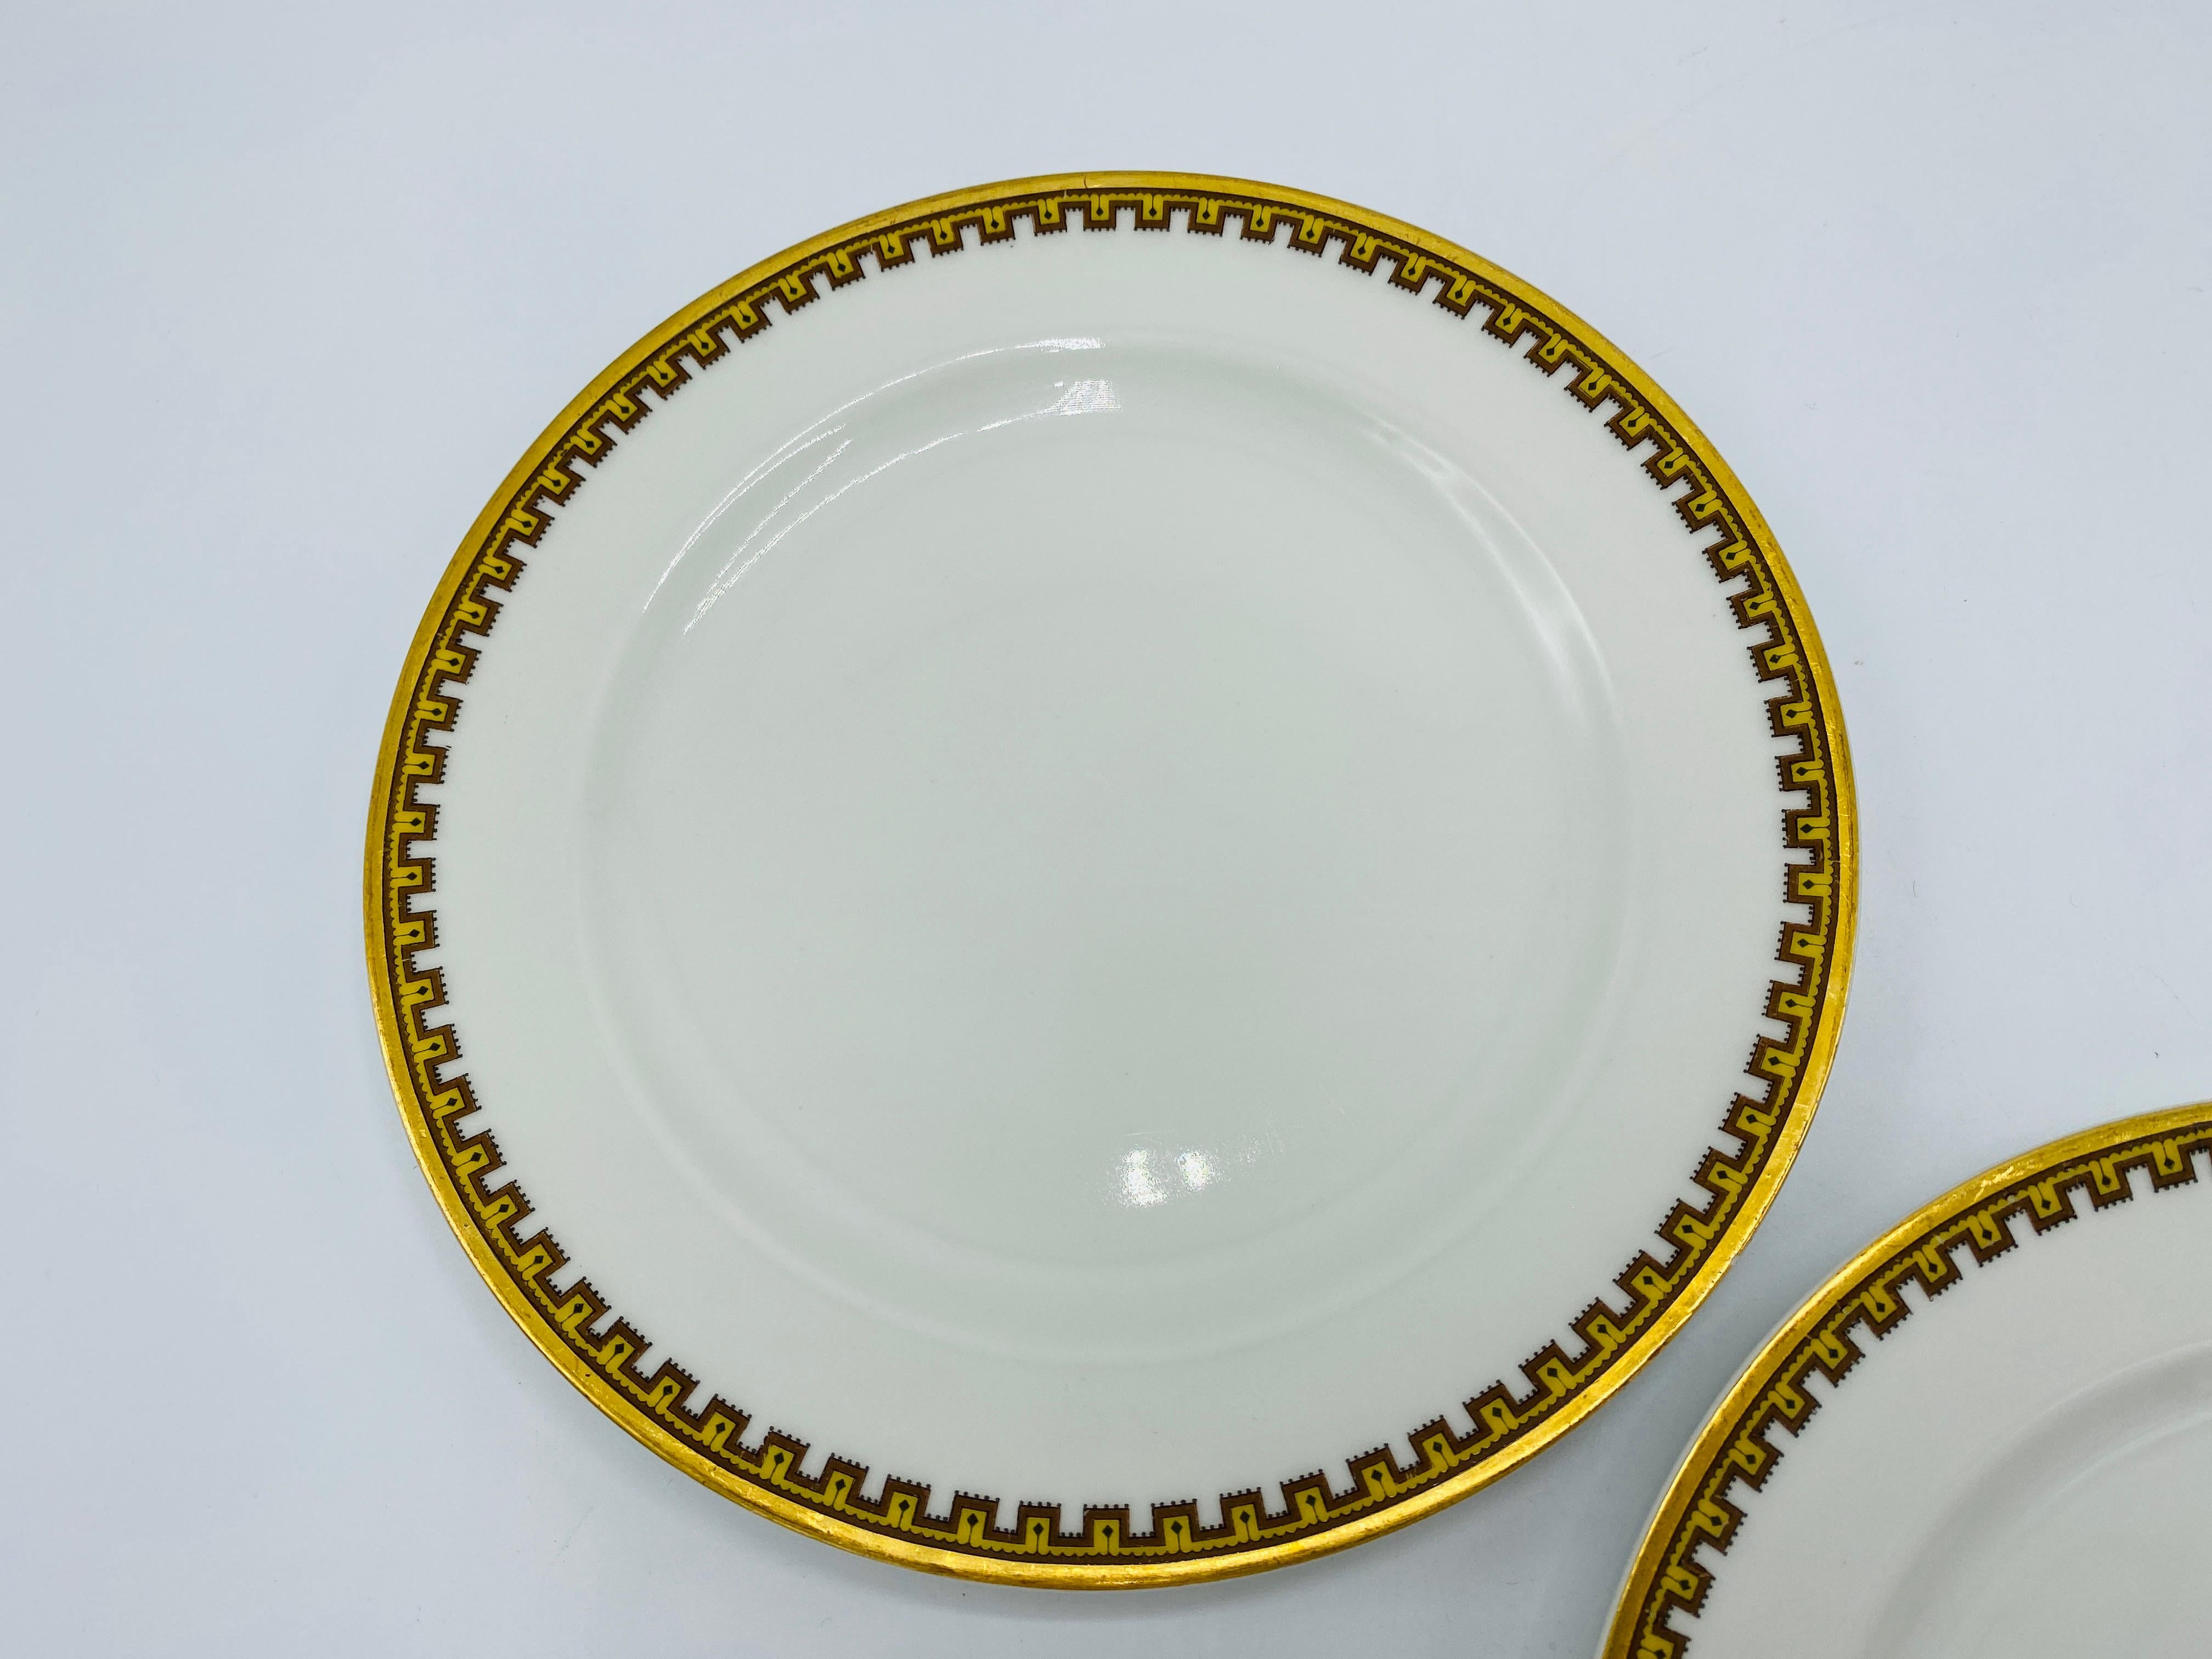 Listed is a stunning, set of 5, Haviland & Co. for Limoges France plates, circa 1950s. The set is in the highly sought after 'Schleiger 962 - H SCH962' Greek key geometric pattern. An elegant and sophisticated china pattern, with golden yellow and